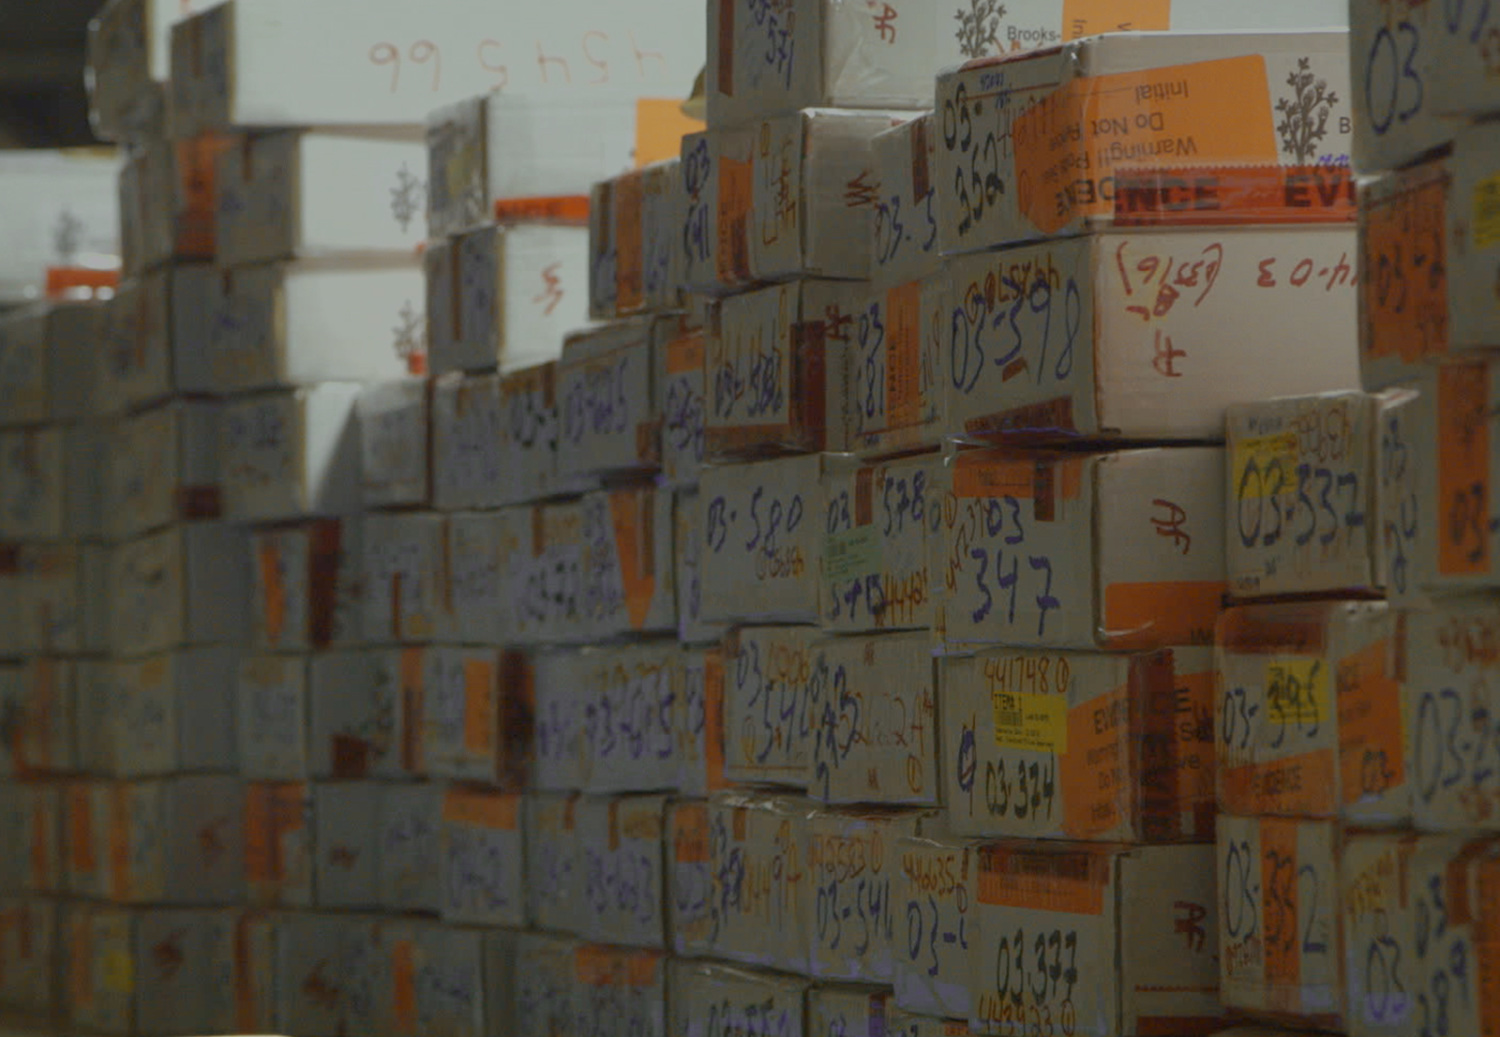 Image of room with piles of boxes of rape kits